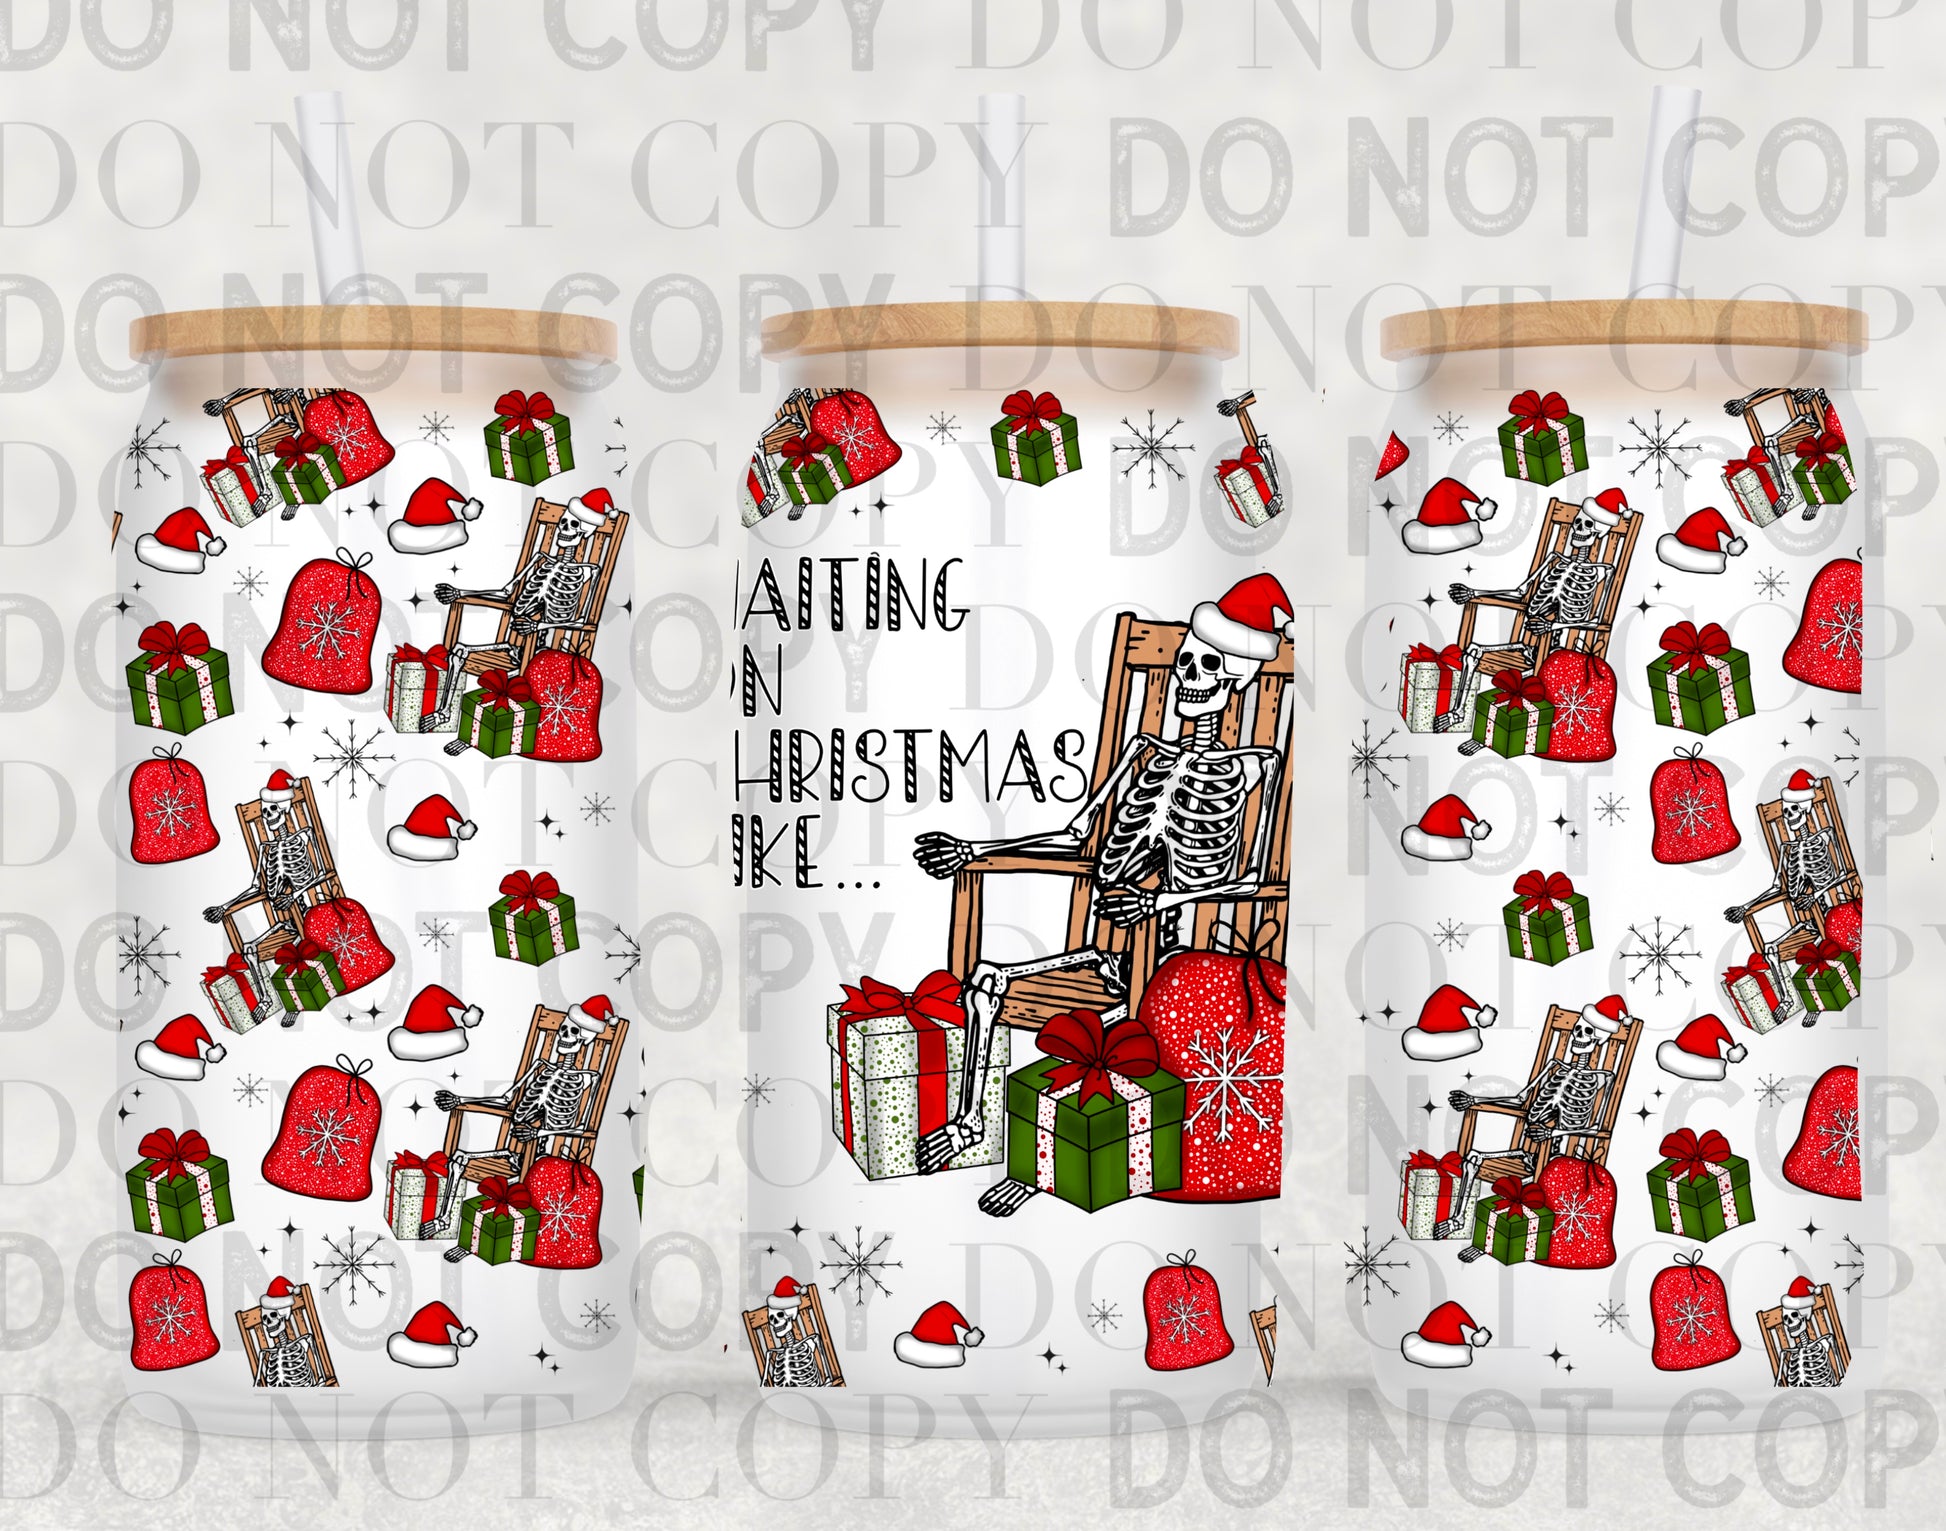 Waiting for Christmas tumbler wrap sized for 16 oz frosted cup from mother tumbler  Cerra's Shop Creates   